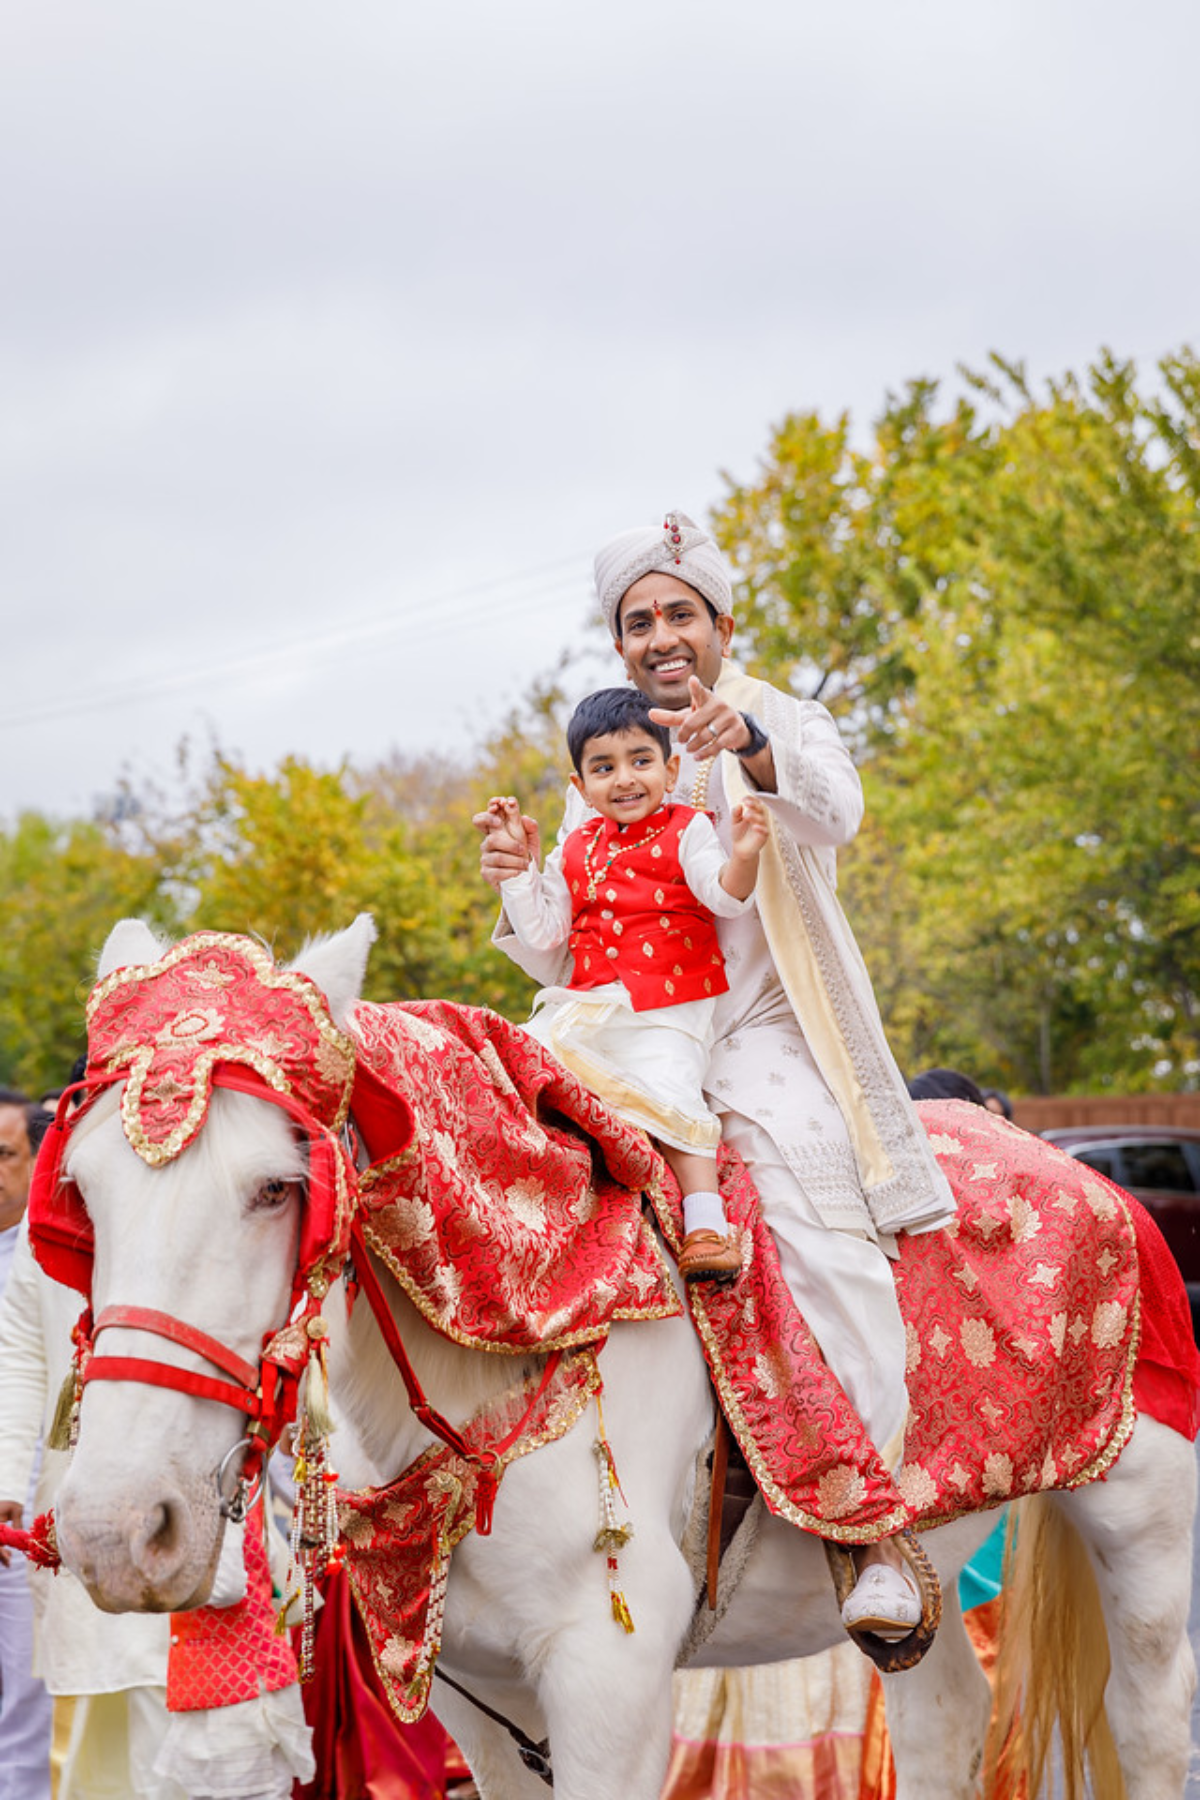 Ever seen a Horse being the ring bearer? captured this beautiful picture in a wedding Baraat